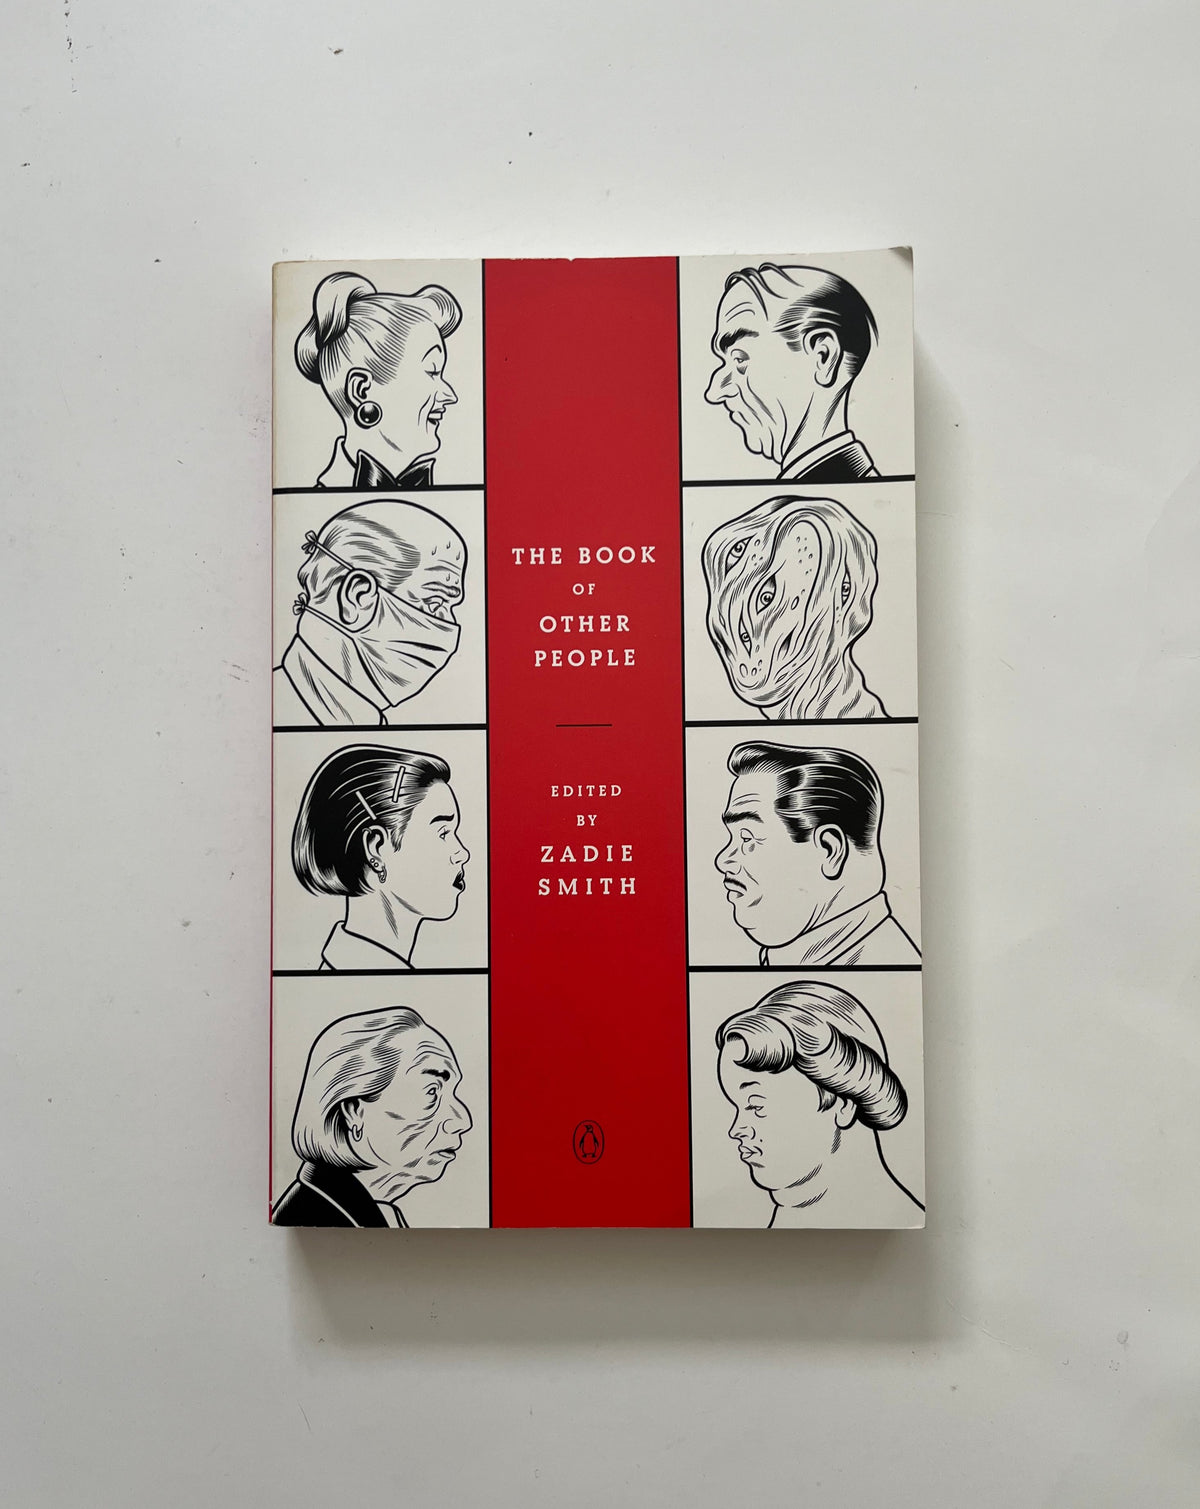 The Book of Other People edited by Zadie Smith